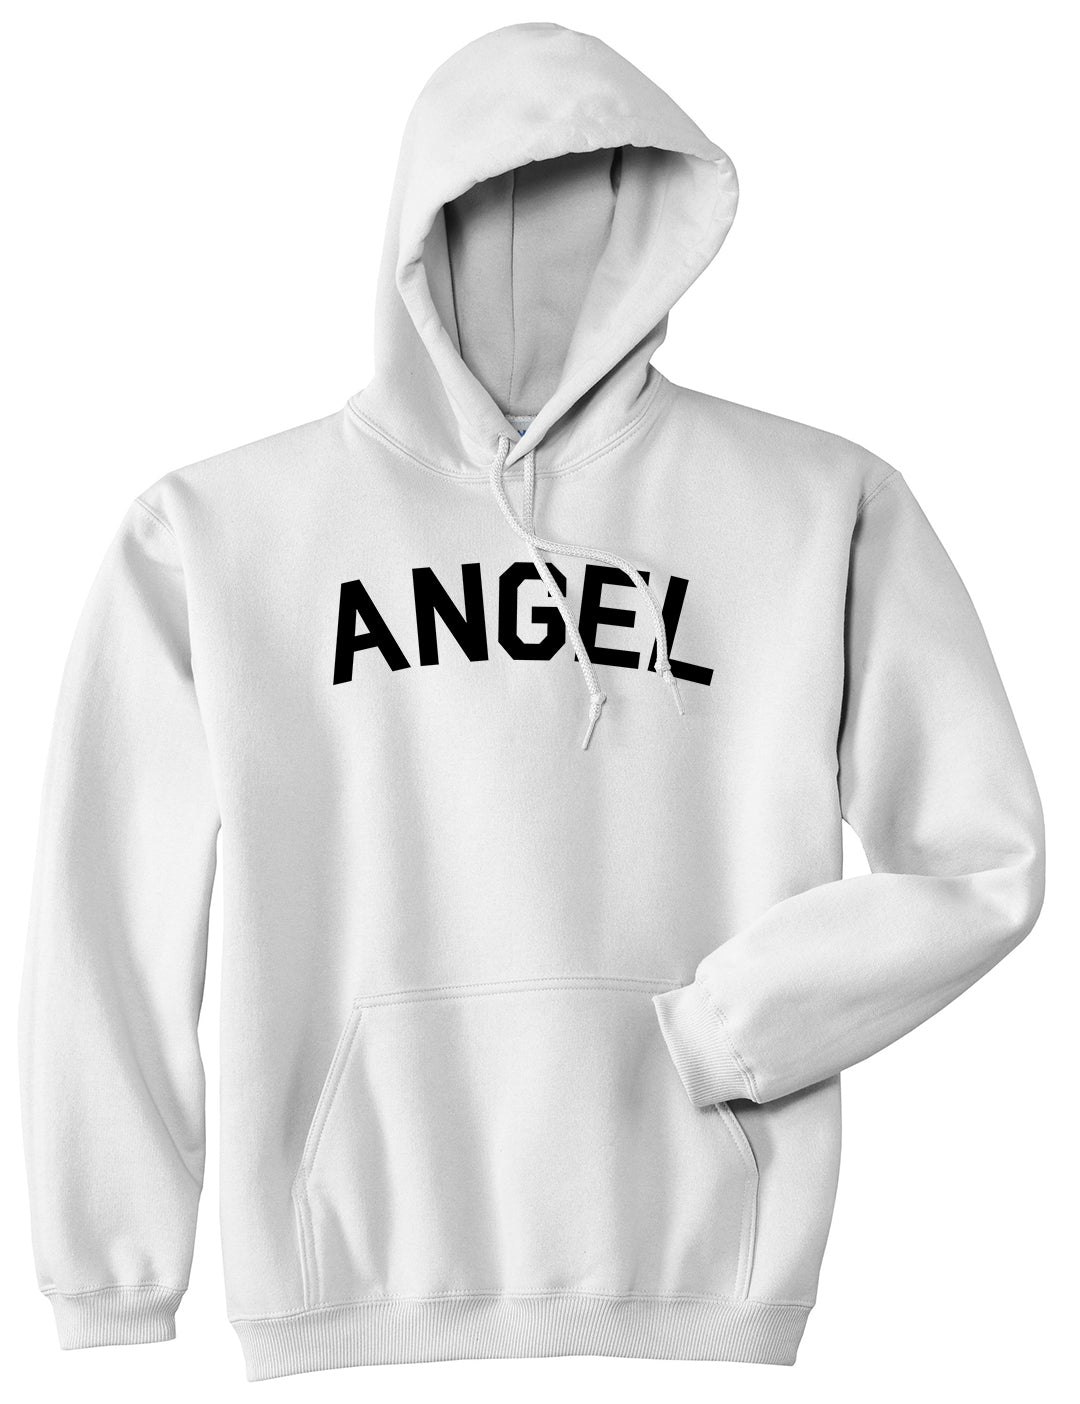 Angel Arch Good Pullover Hoodie in White